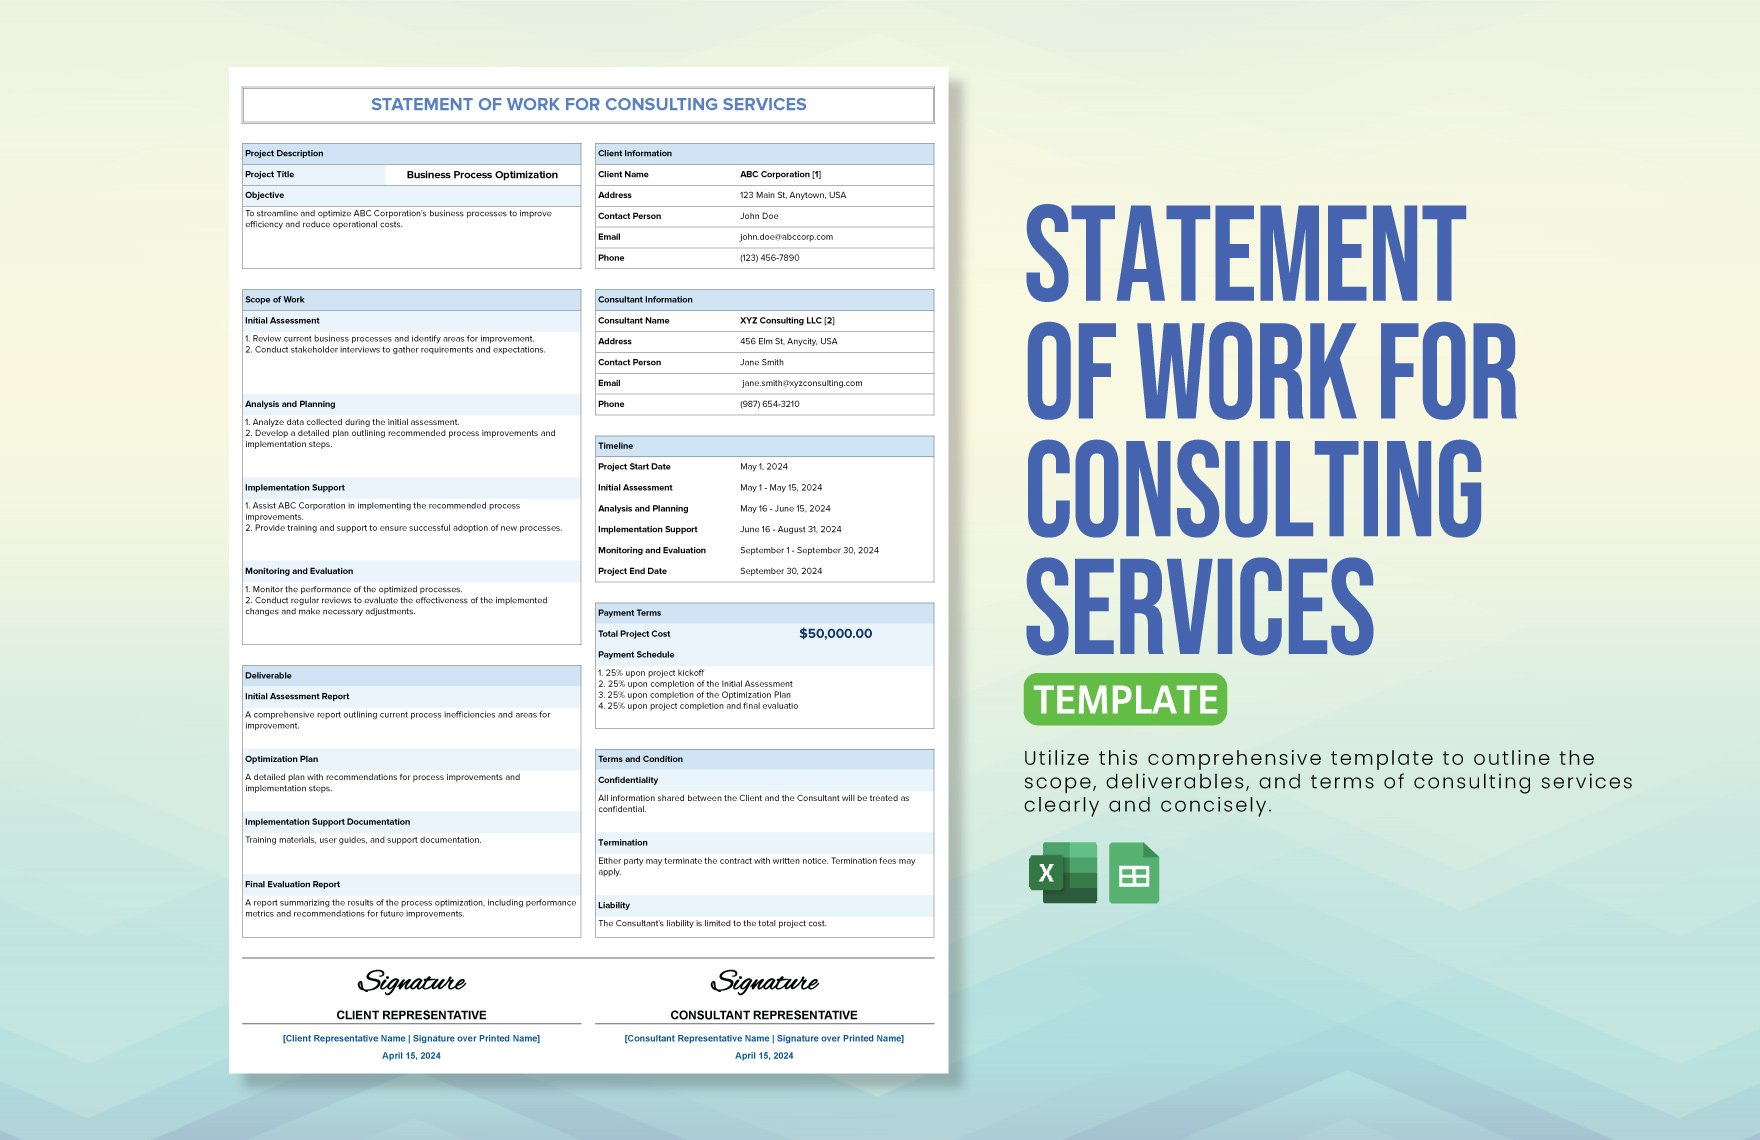 Statement of Work For Consulting Services Template